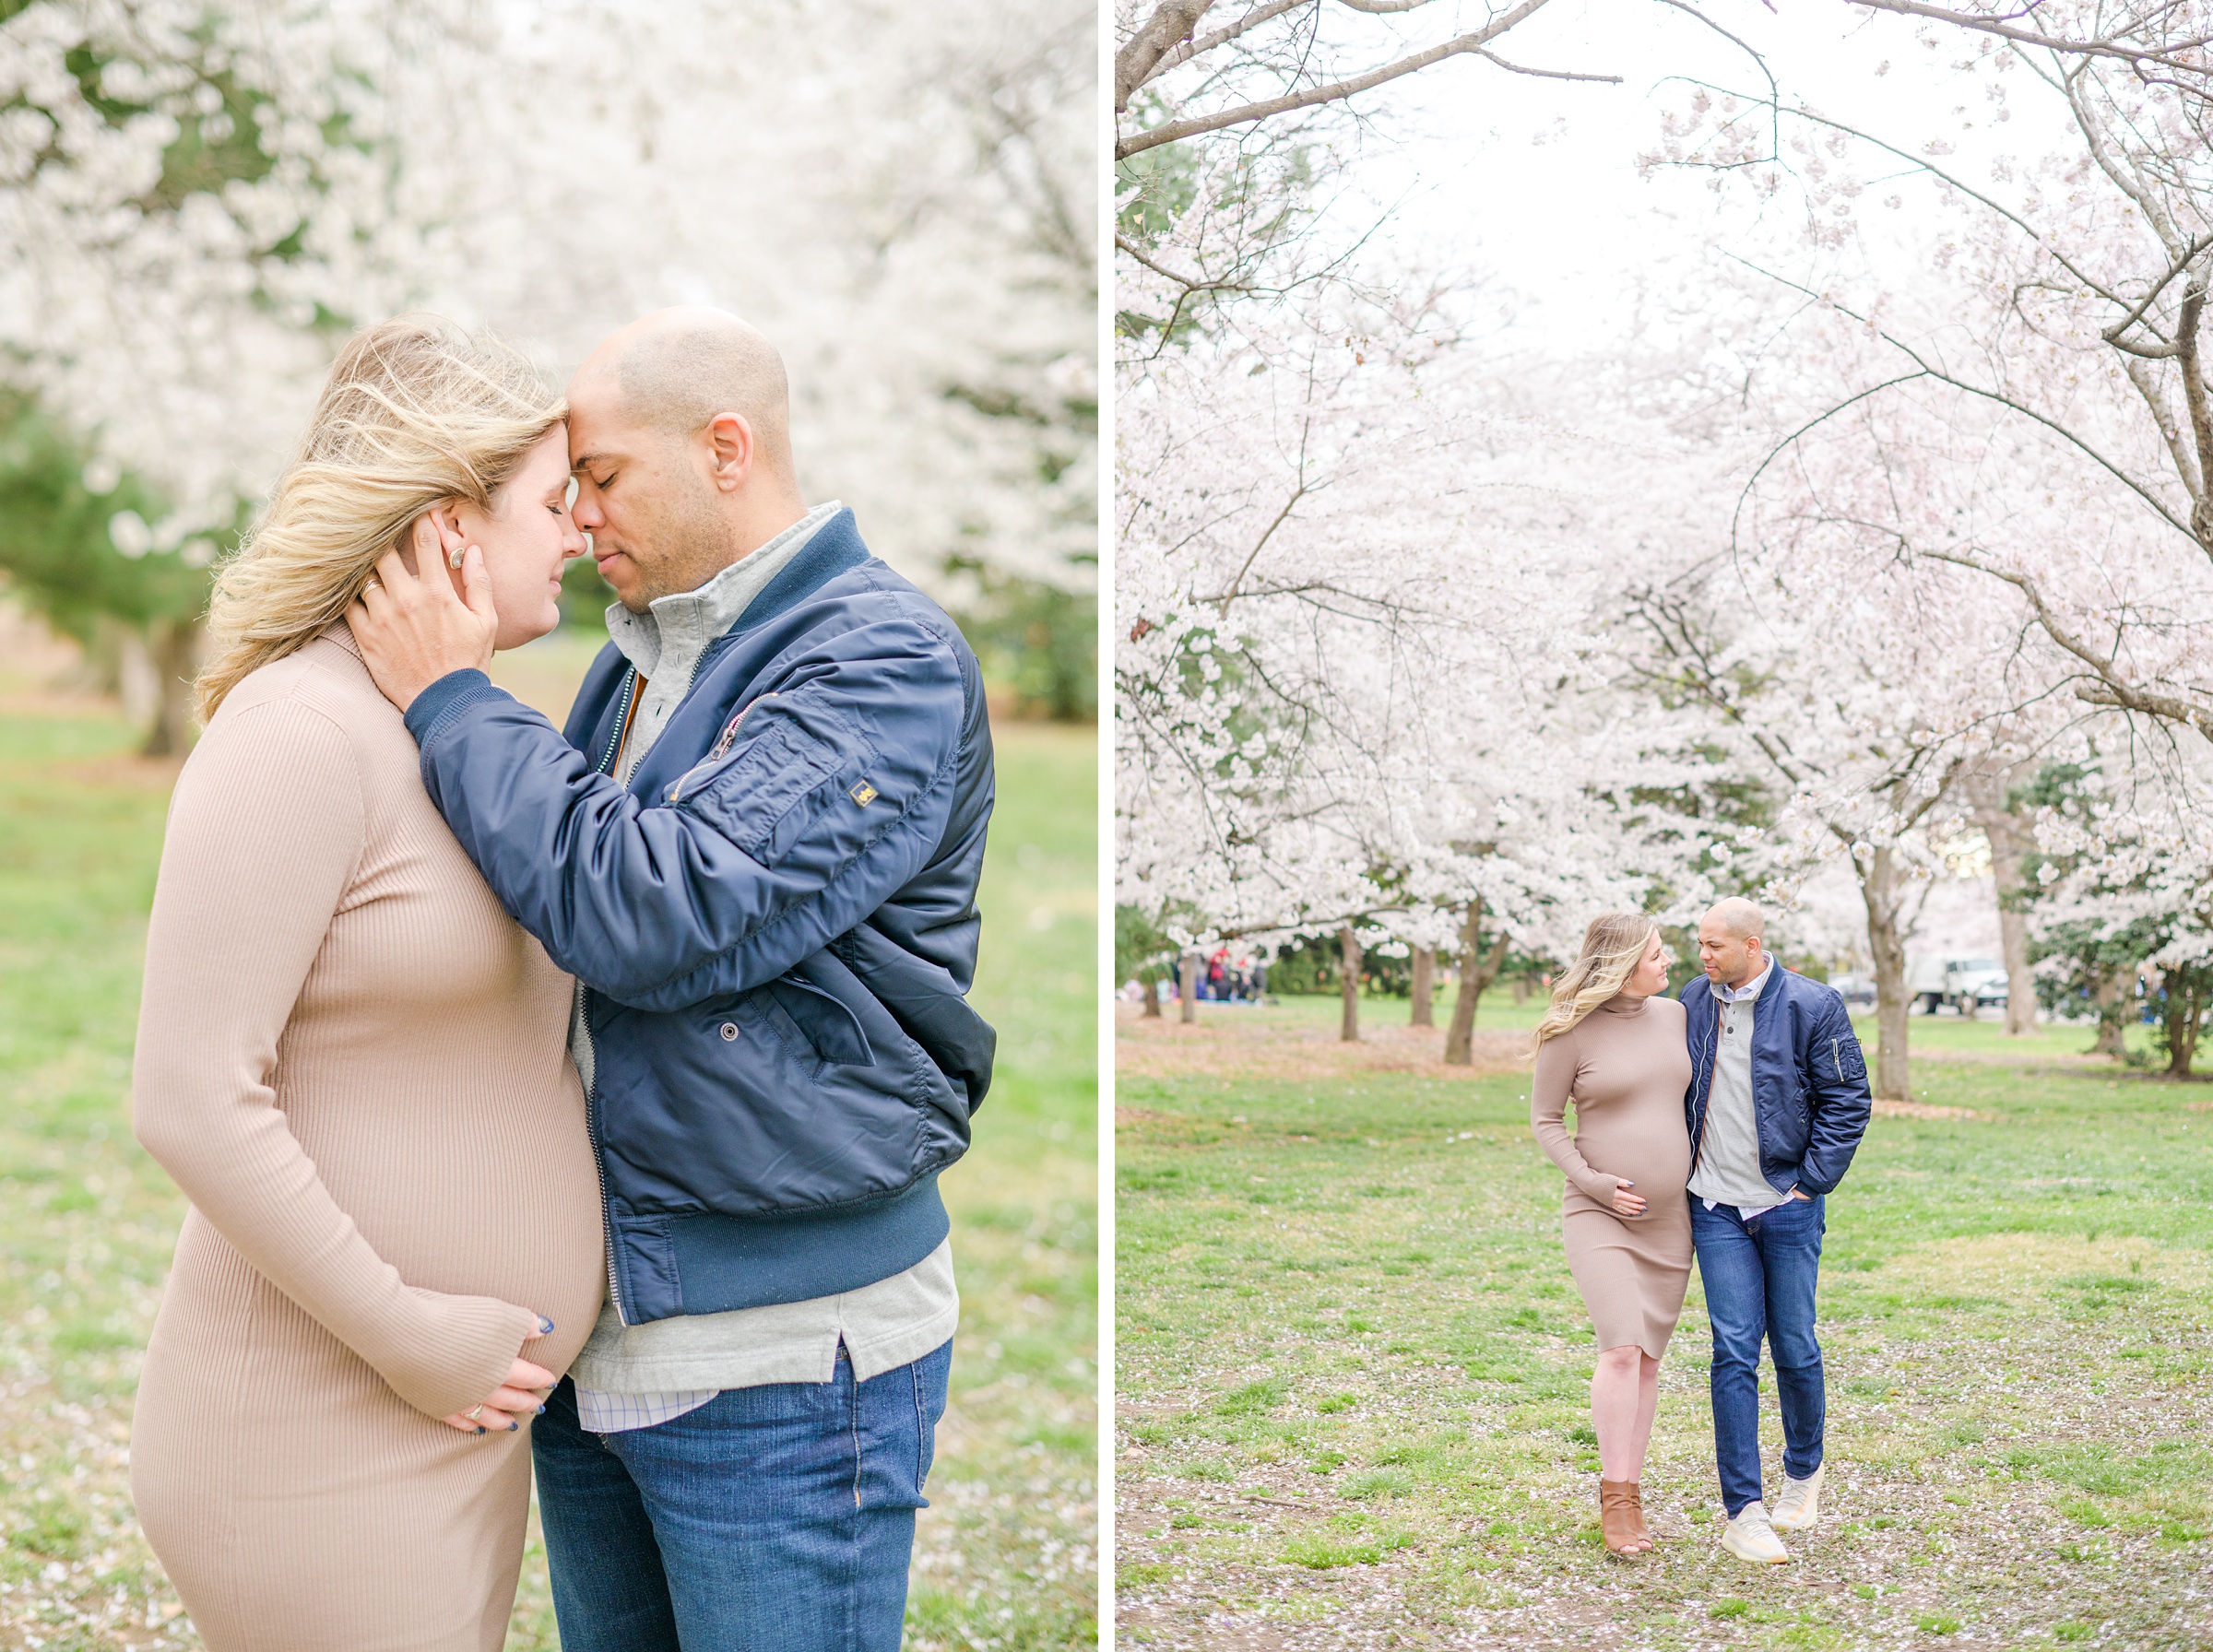 Mama and dad-to-be poses with her bump amongst the cherry blossoms at the Washington, DC Tidal Basin during a maternity session photographed by Cait Kramer Photography